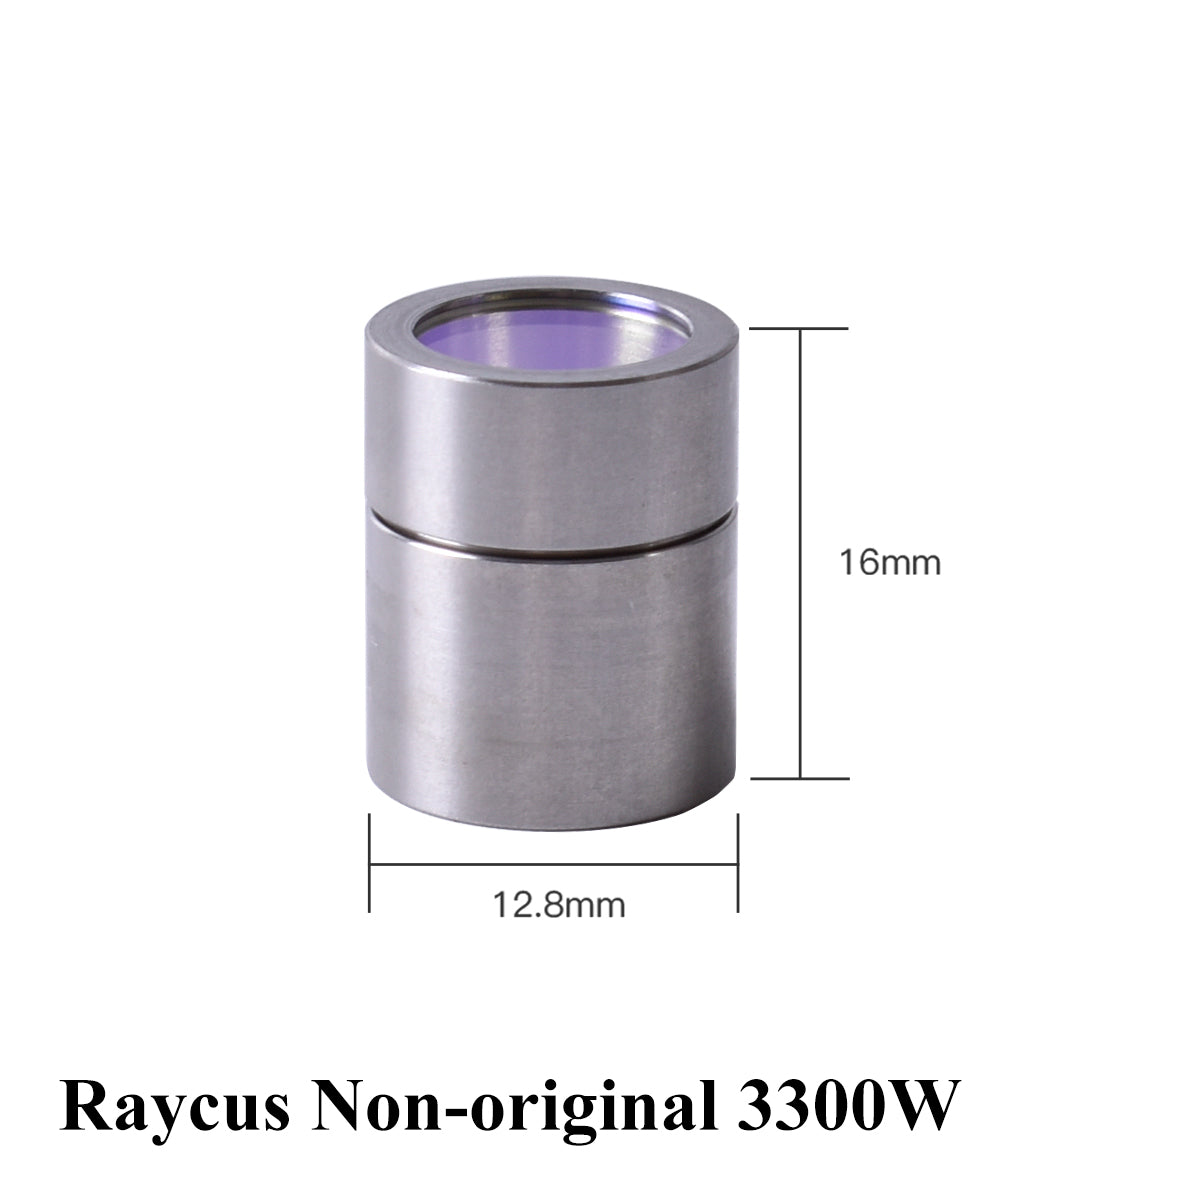 Original 3.3KW Fiber Laser Source QBH Output Connect Protective Lens 4/6KW Raycus Cutting Head